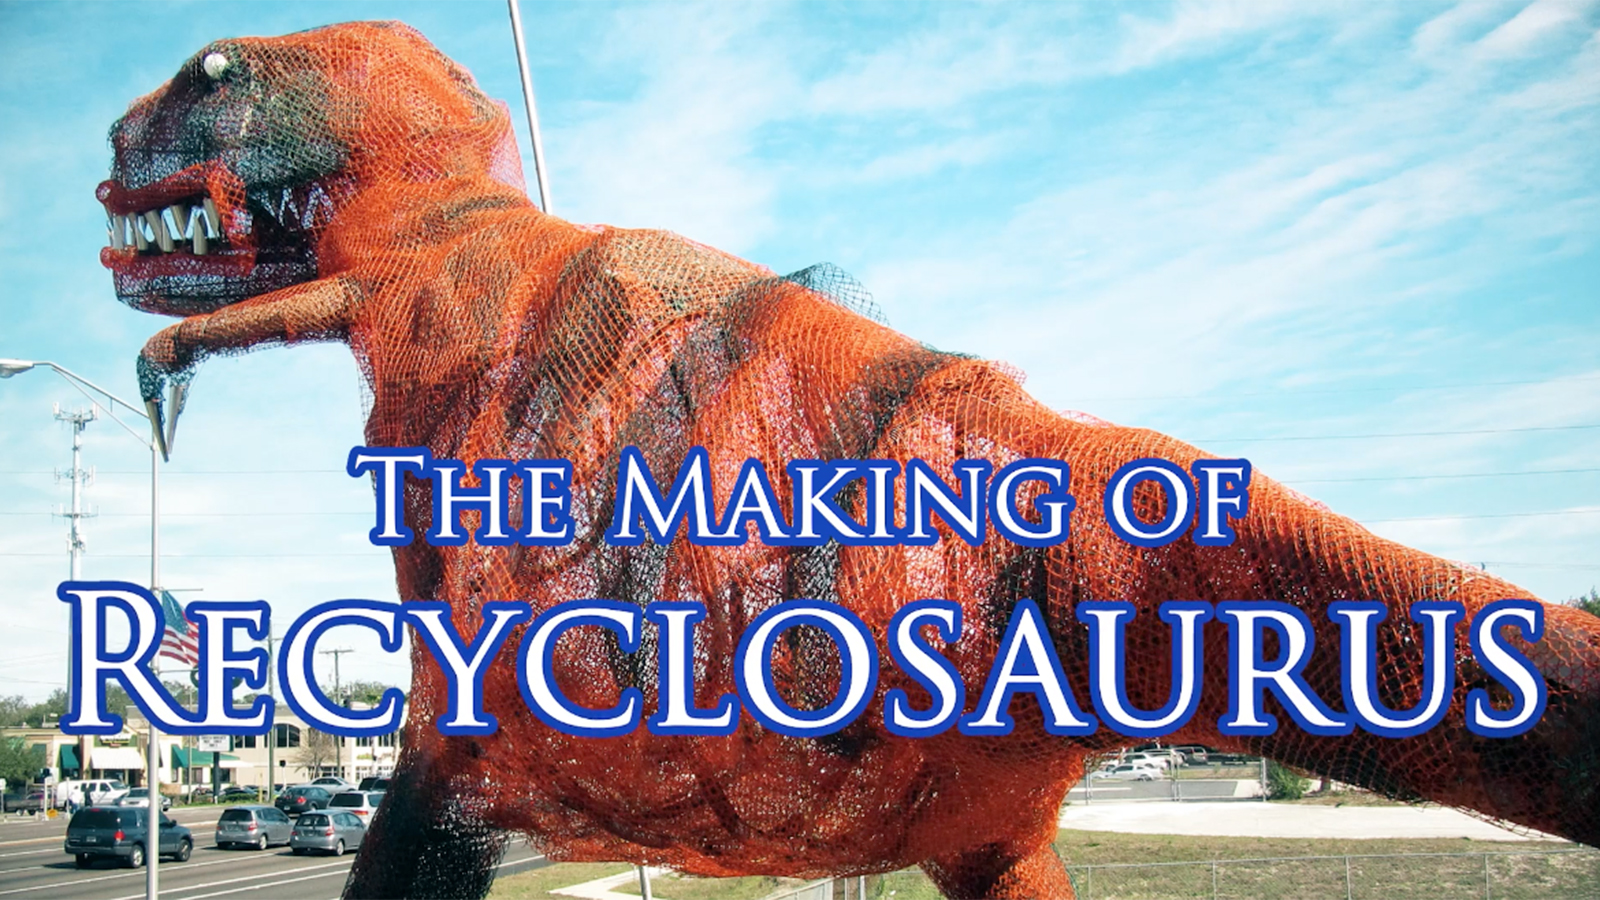 A screenshot of the movie trailer for "The Making of Recyclosaurus Rex"